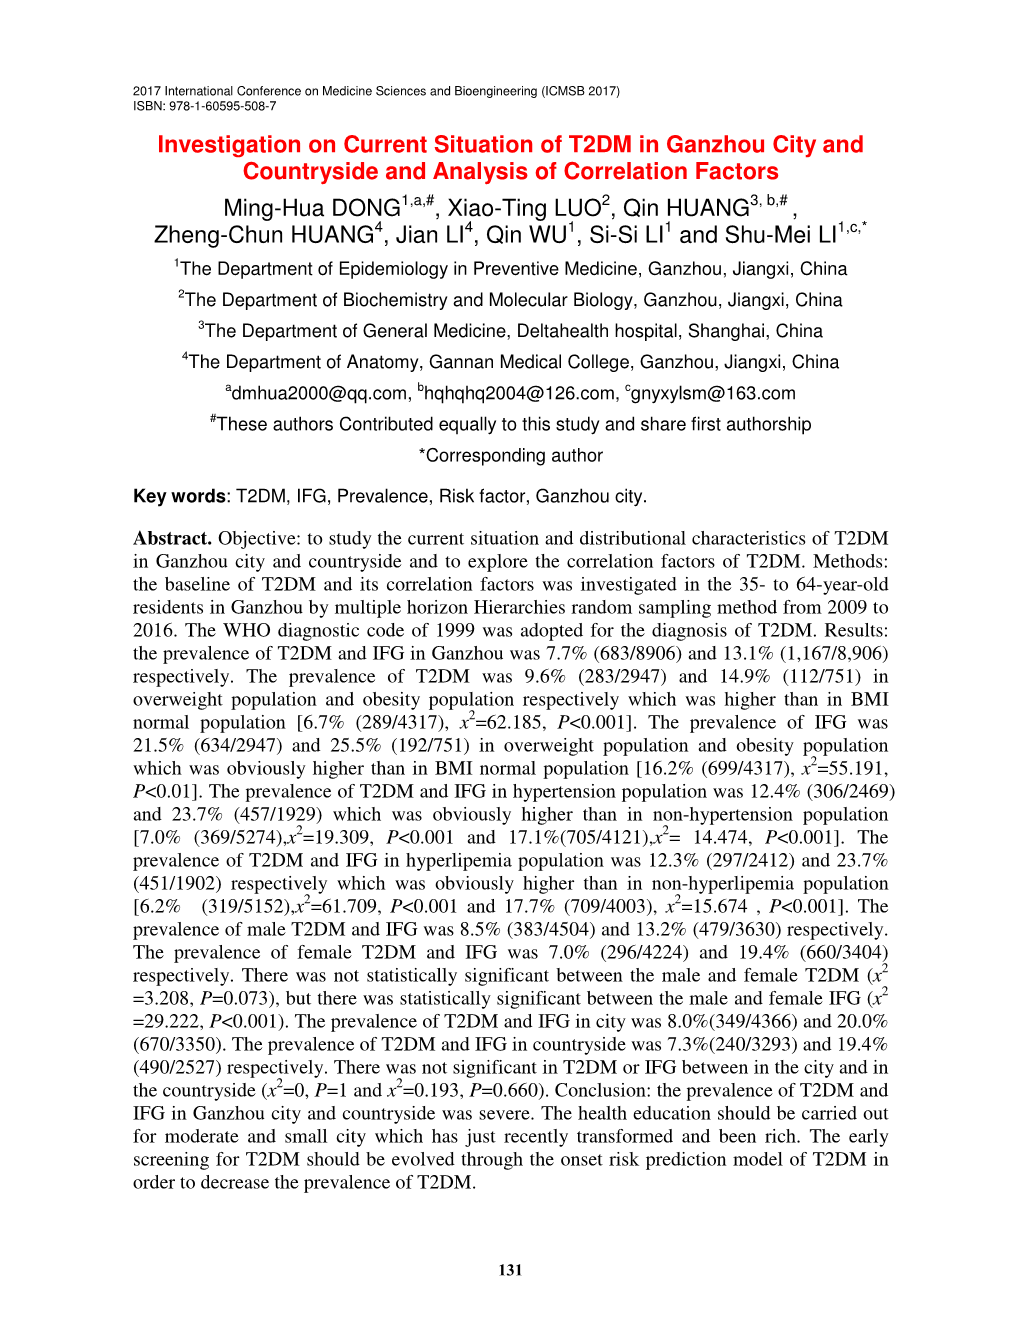 Investigation on Current Situation of T2DM in Ganzhou City and Countryside and Analysis of Correlation Factors Ming-Hua DONG